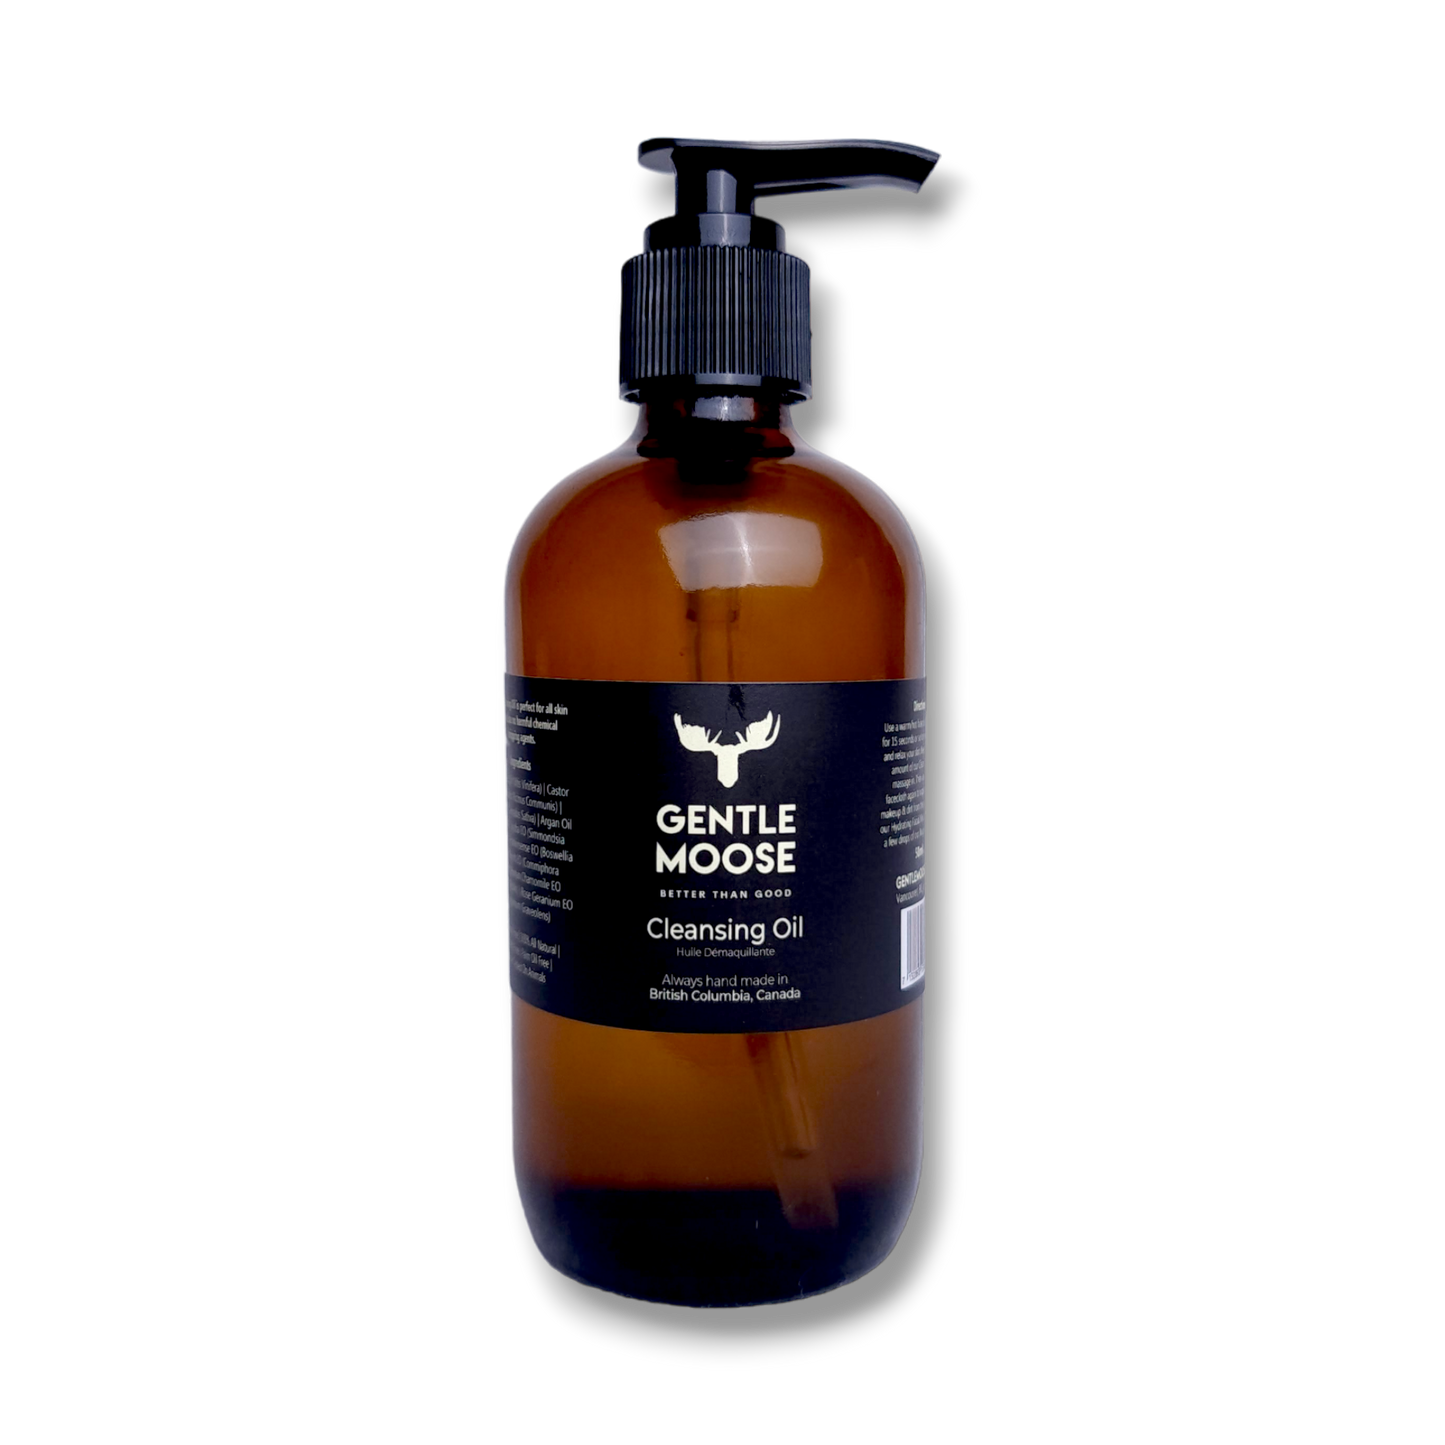 Gentle Moose Skincare Natural Cleansing Oil made in Canada